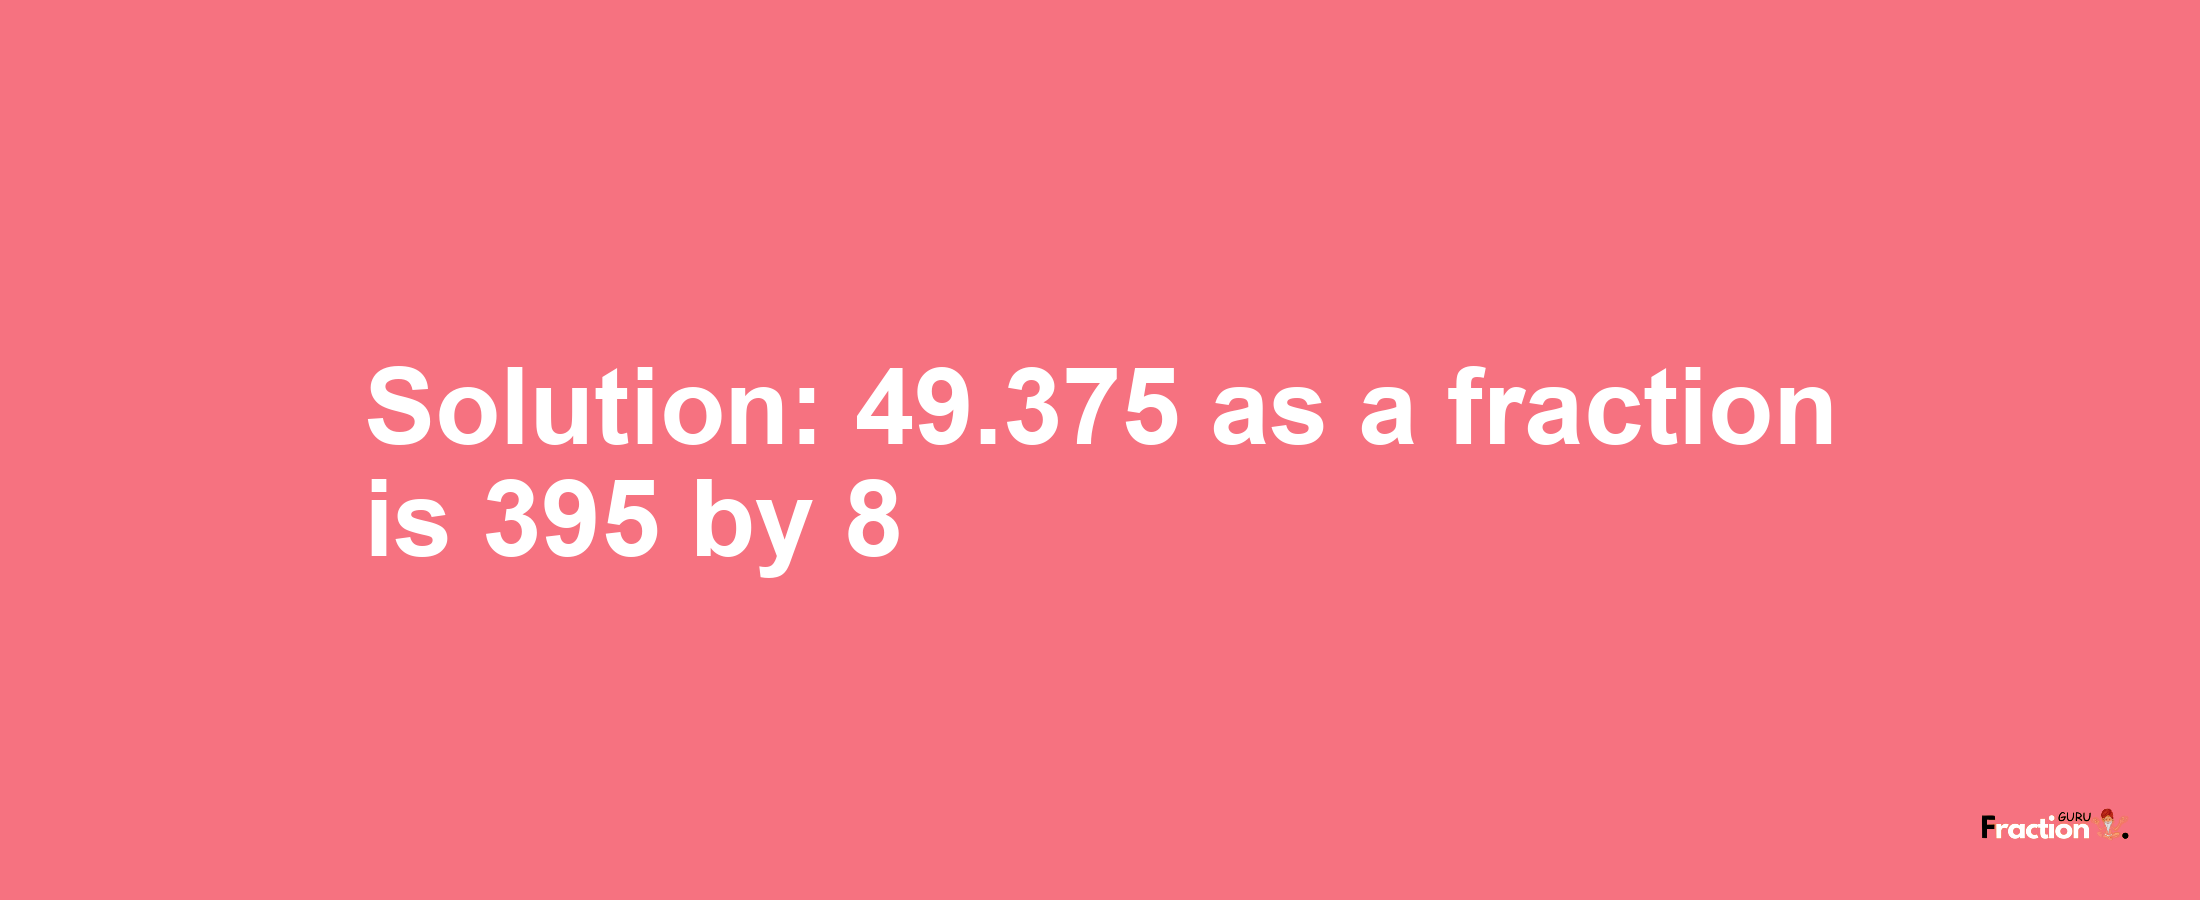 Solution:49.375 as a fraction is 395/8